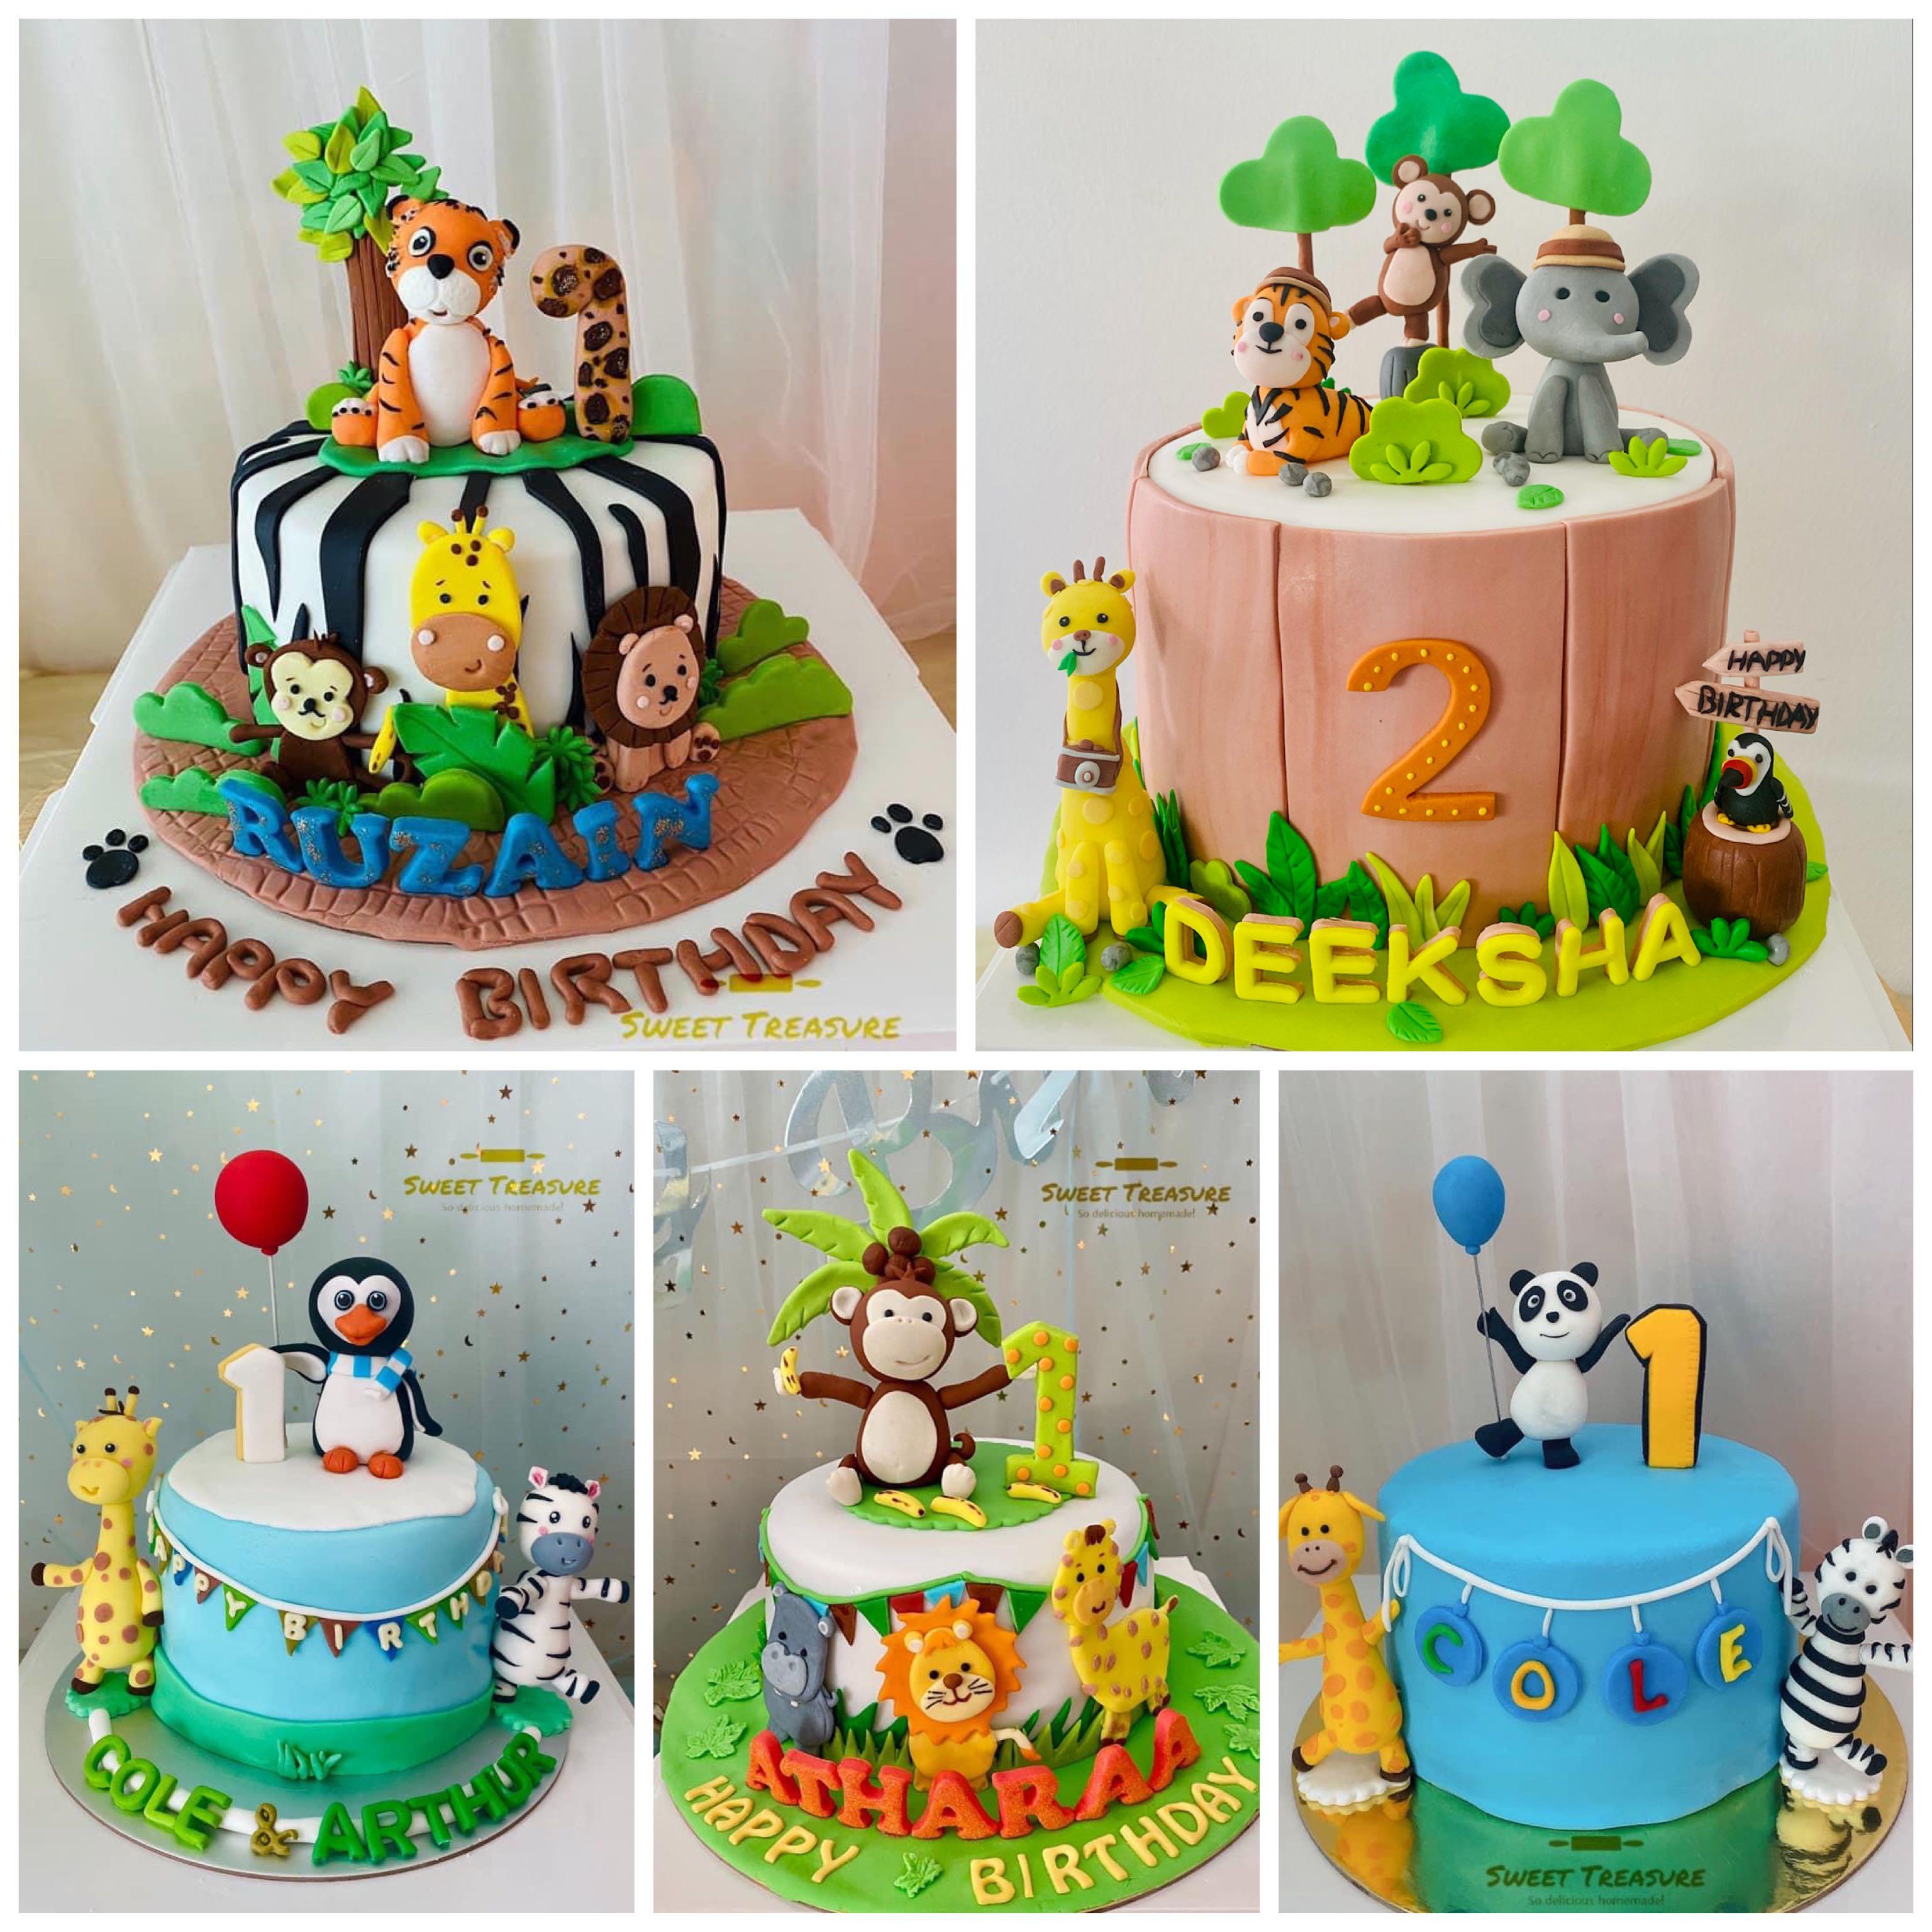 Fondant Circus Animals Cake Toppers | Edible Designs by Letty | Flickr